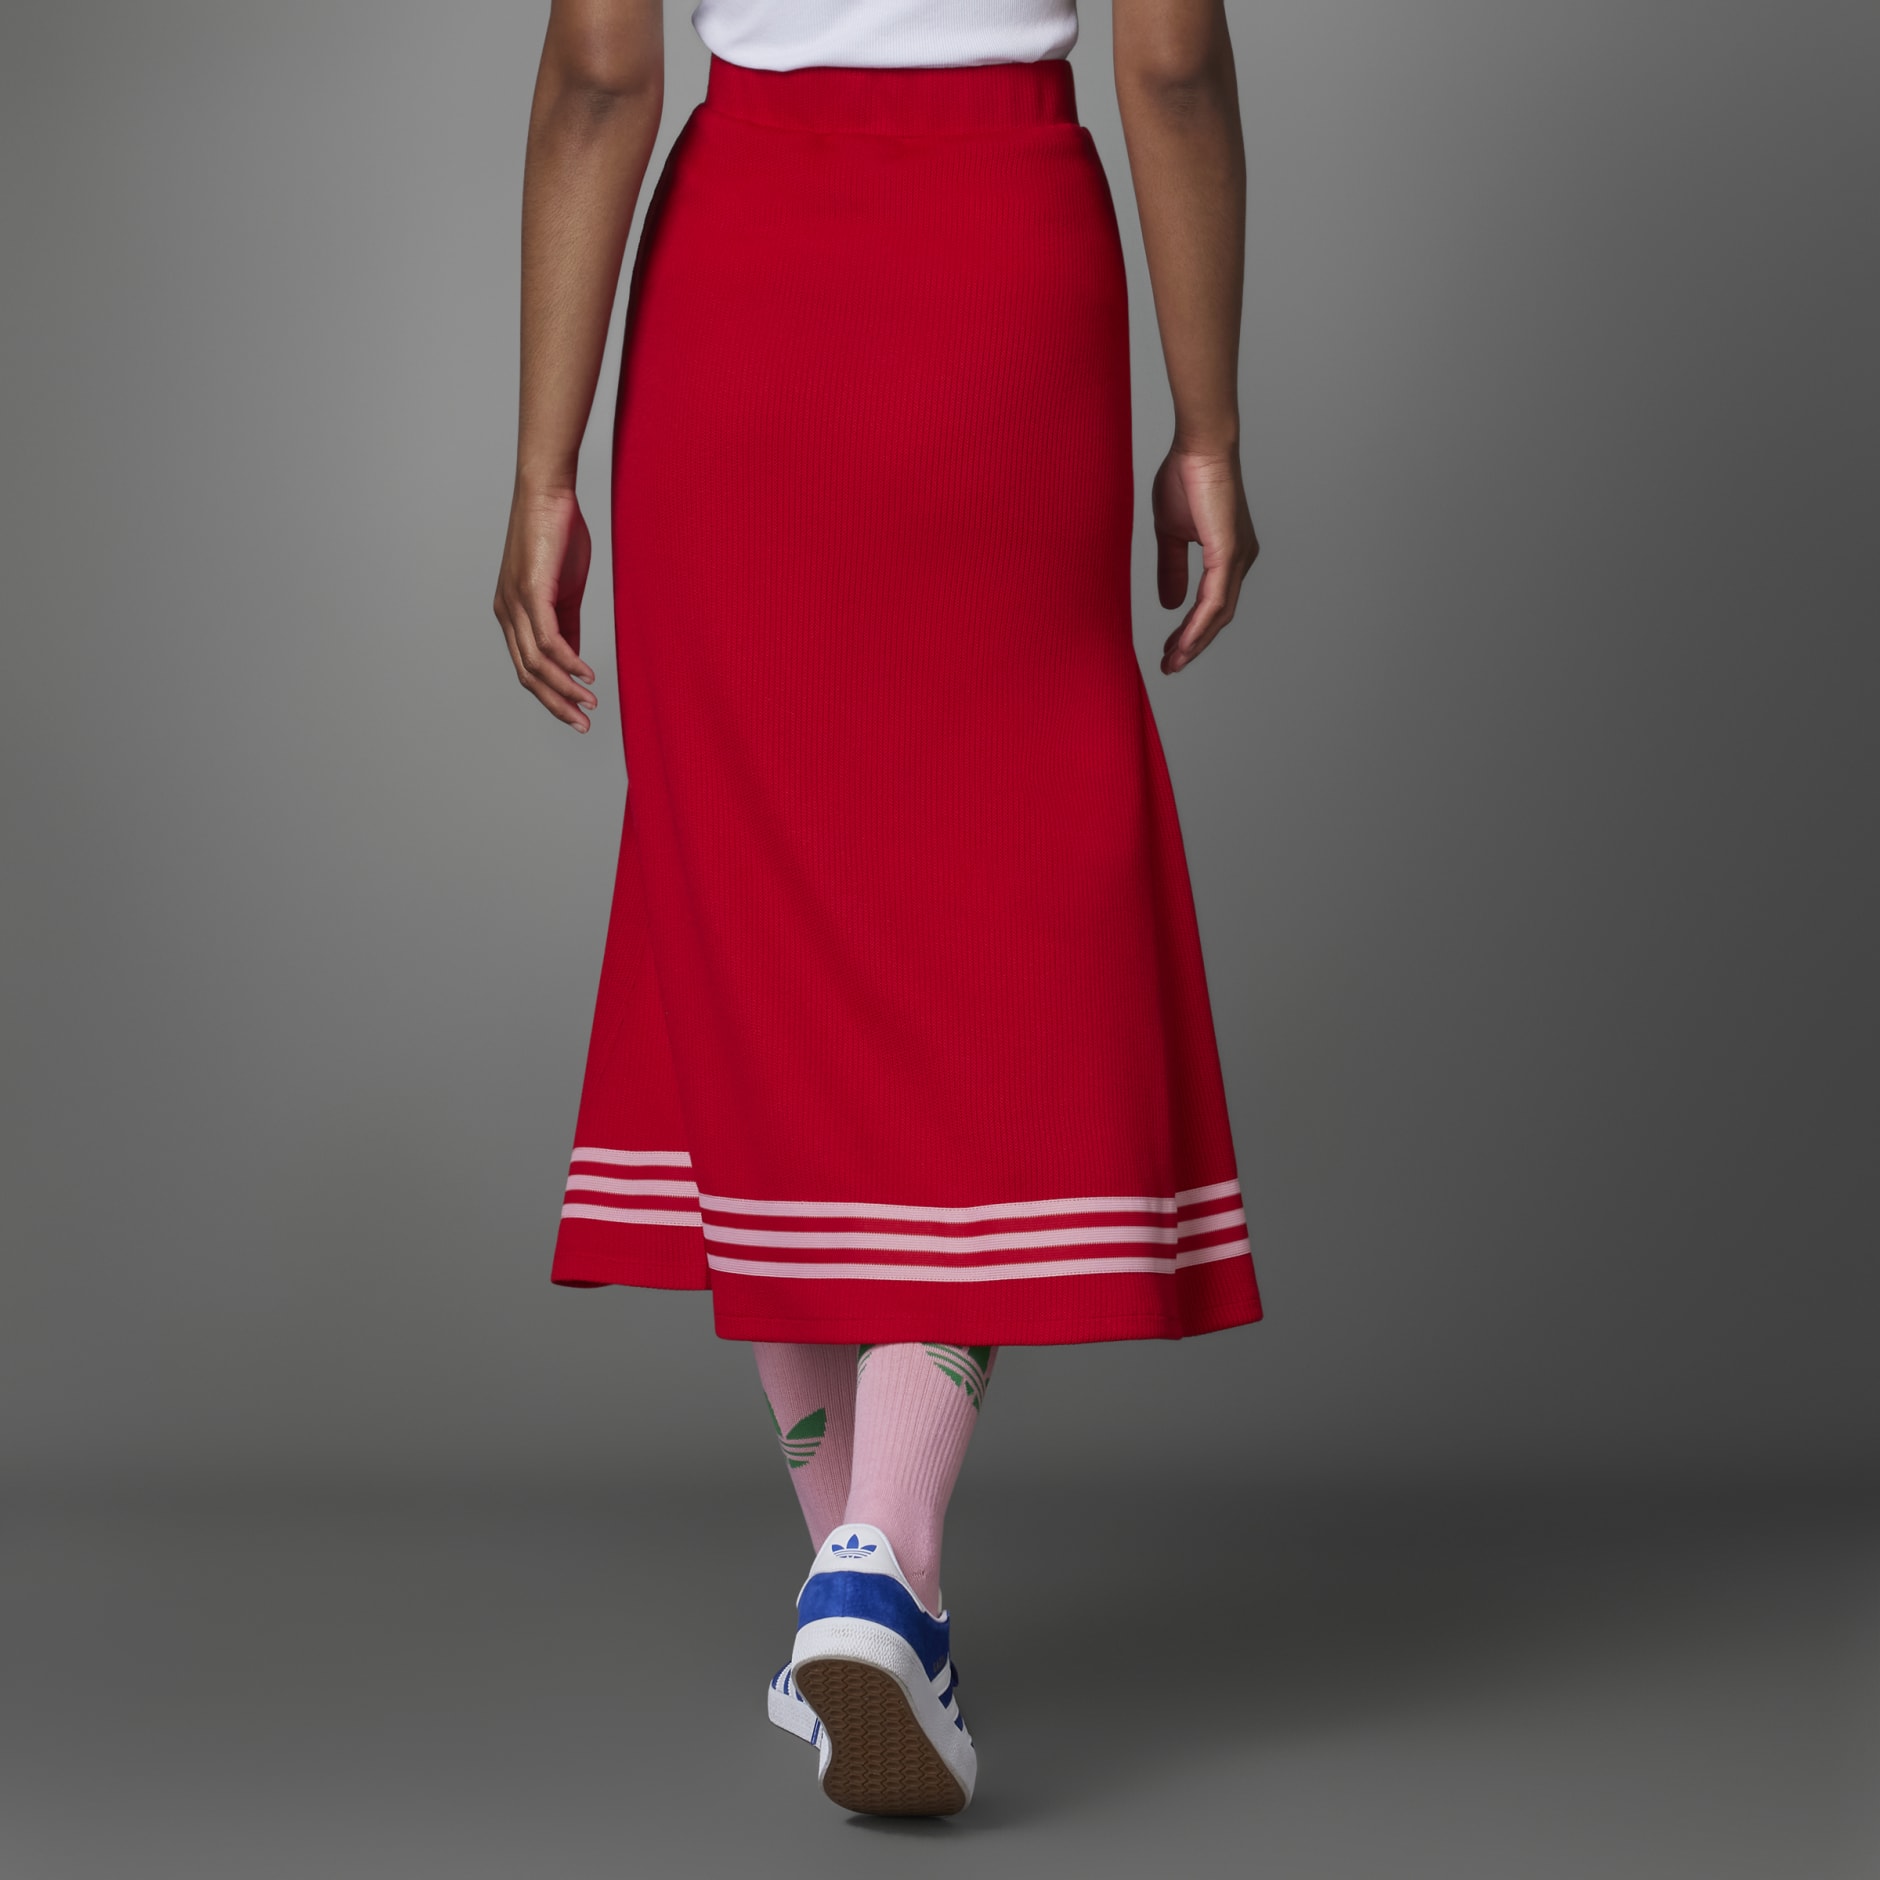 nyhed At læse Fortælle Women's Clothing - Adicolor 70s Knit Skirt - Red | adidas Oman